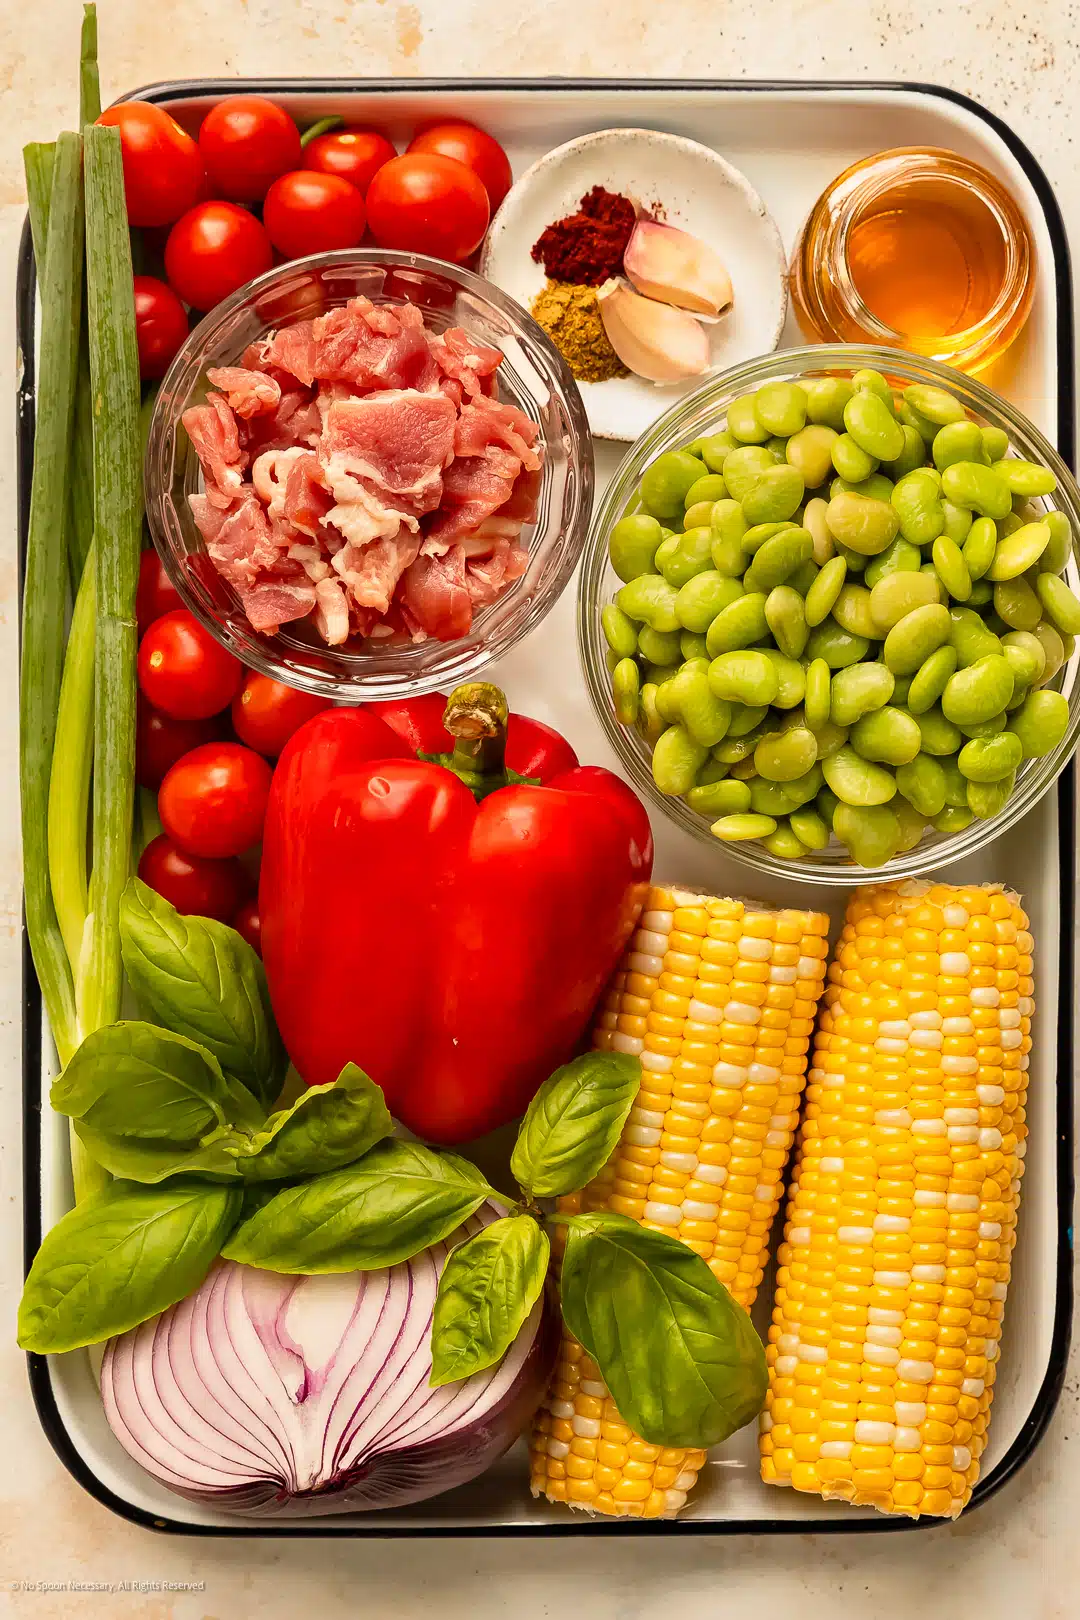 Overhead photo of the ingredients to make succotash - corn, lima beans, tomatoes, bell pepper, onion and fresh herbs - neatly organized on a kitchen tray.